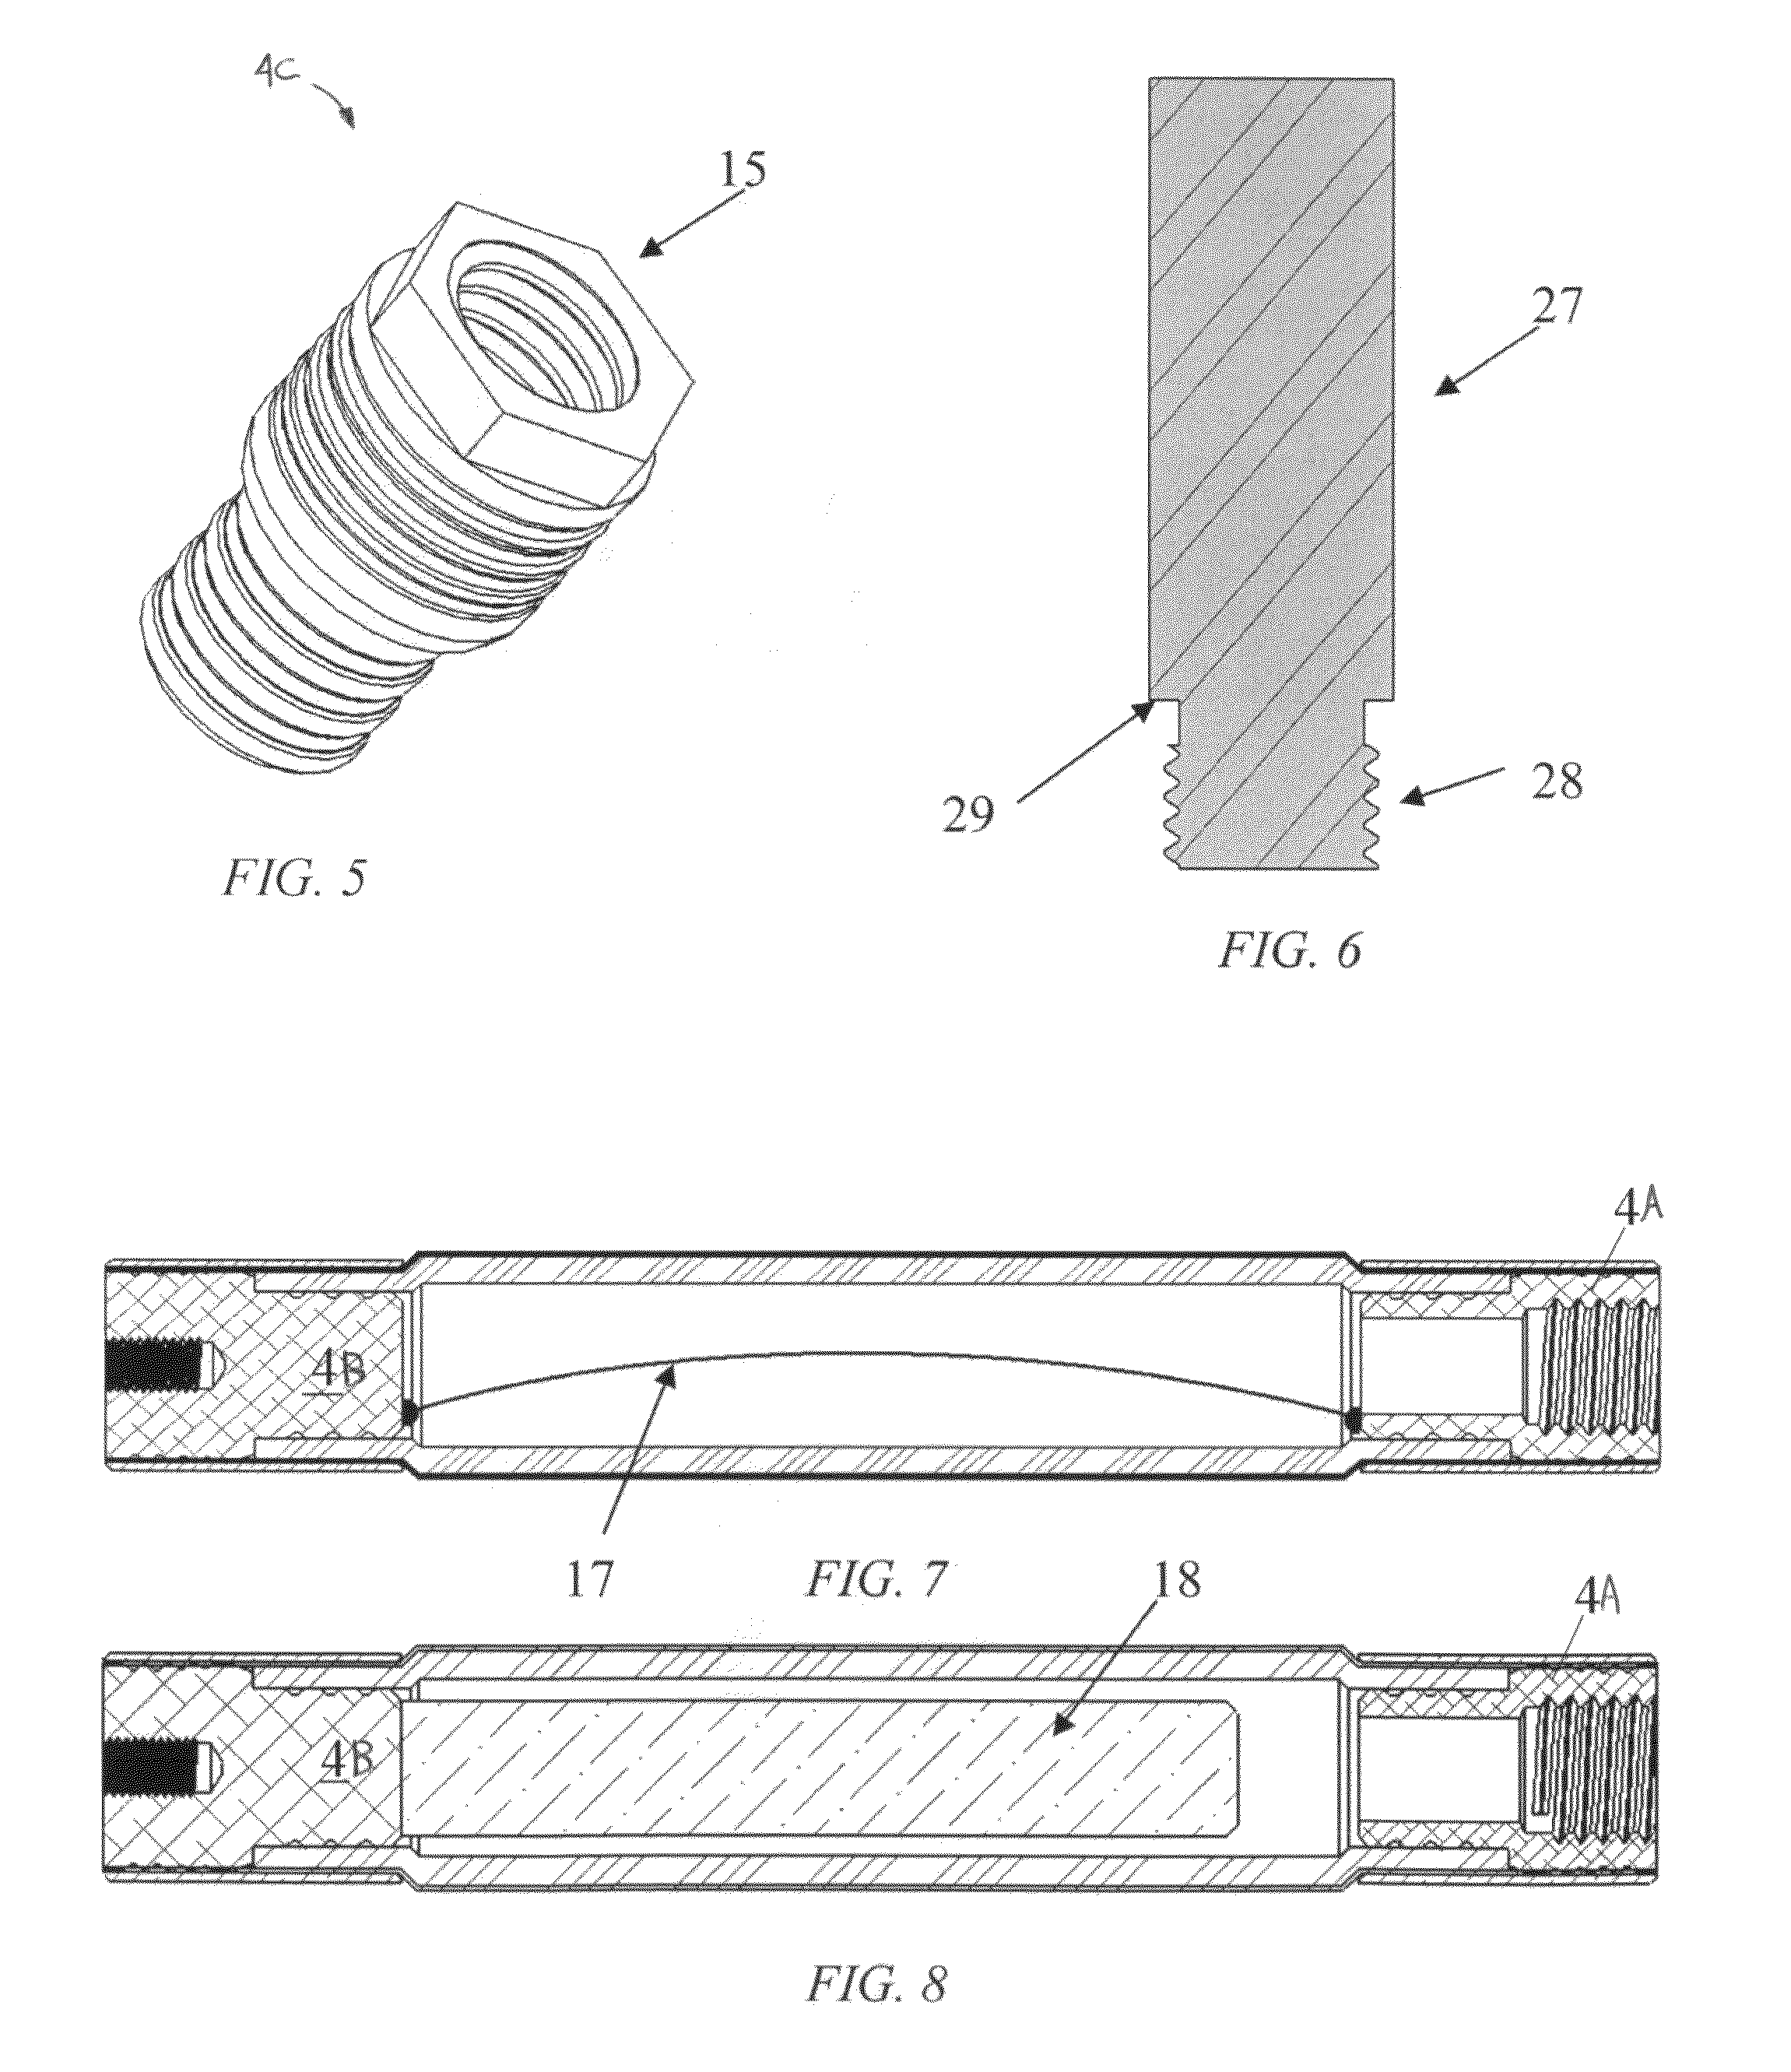 Fluidic artificial muscle actuator and swaging process therefor